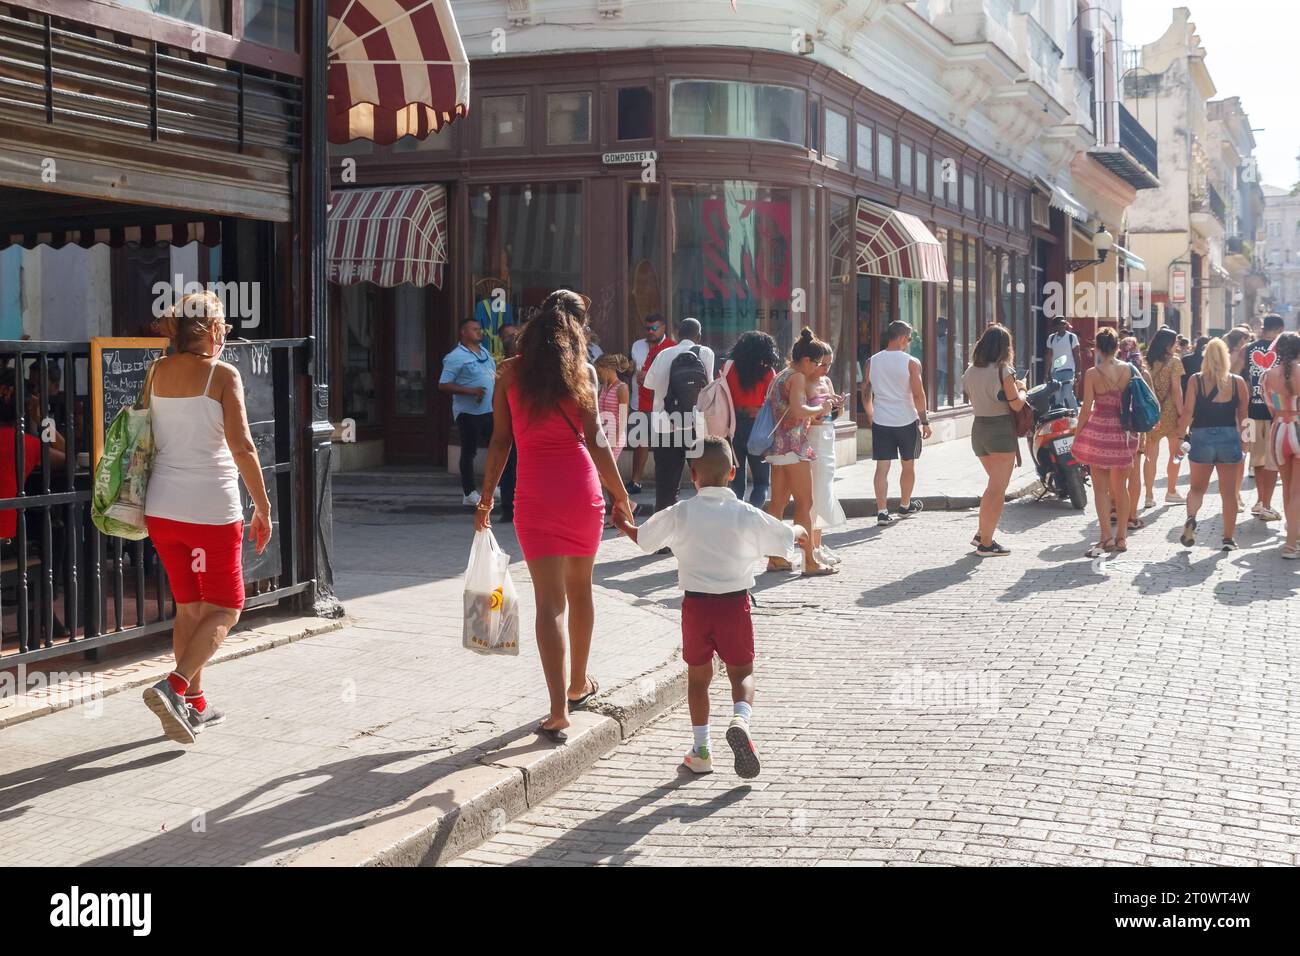 Cuban people in their usual day routines walk in a cobblestone pedestrian boulevard in Old Havana. Stock Photo